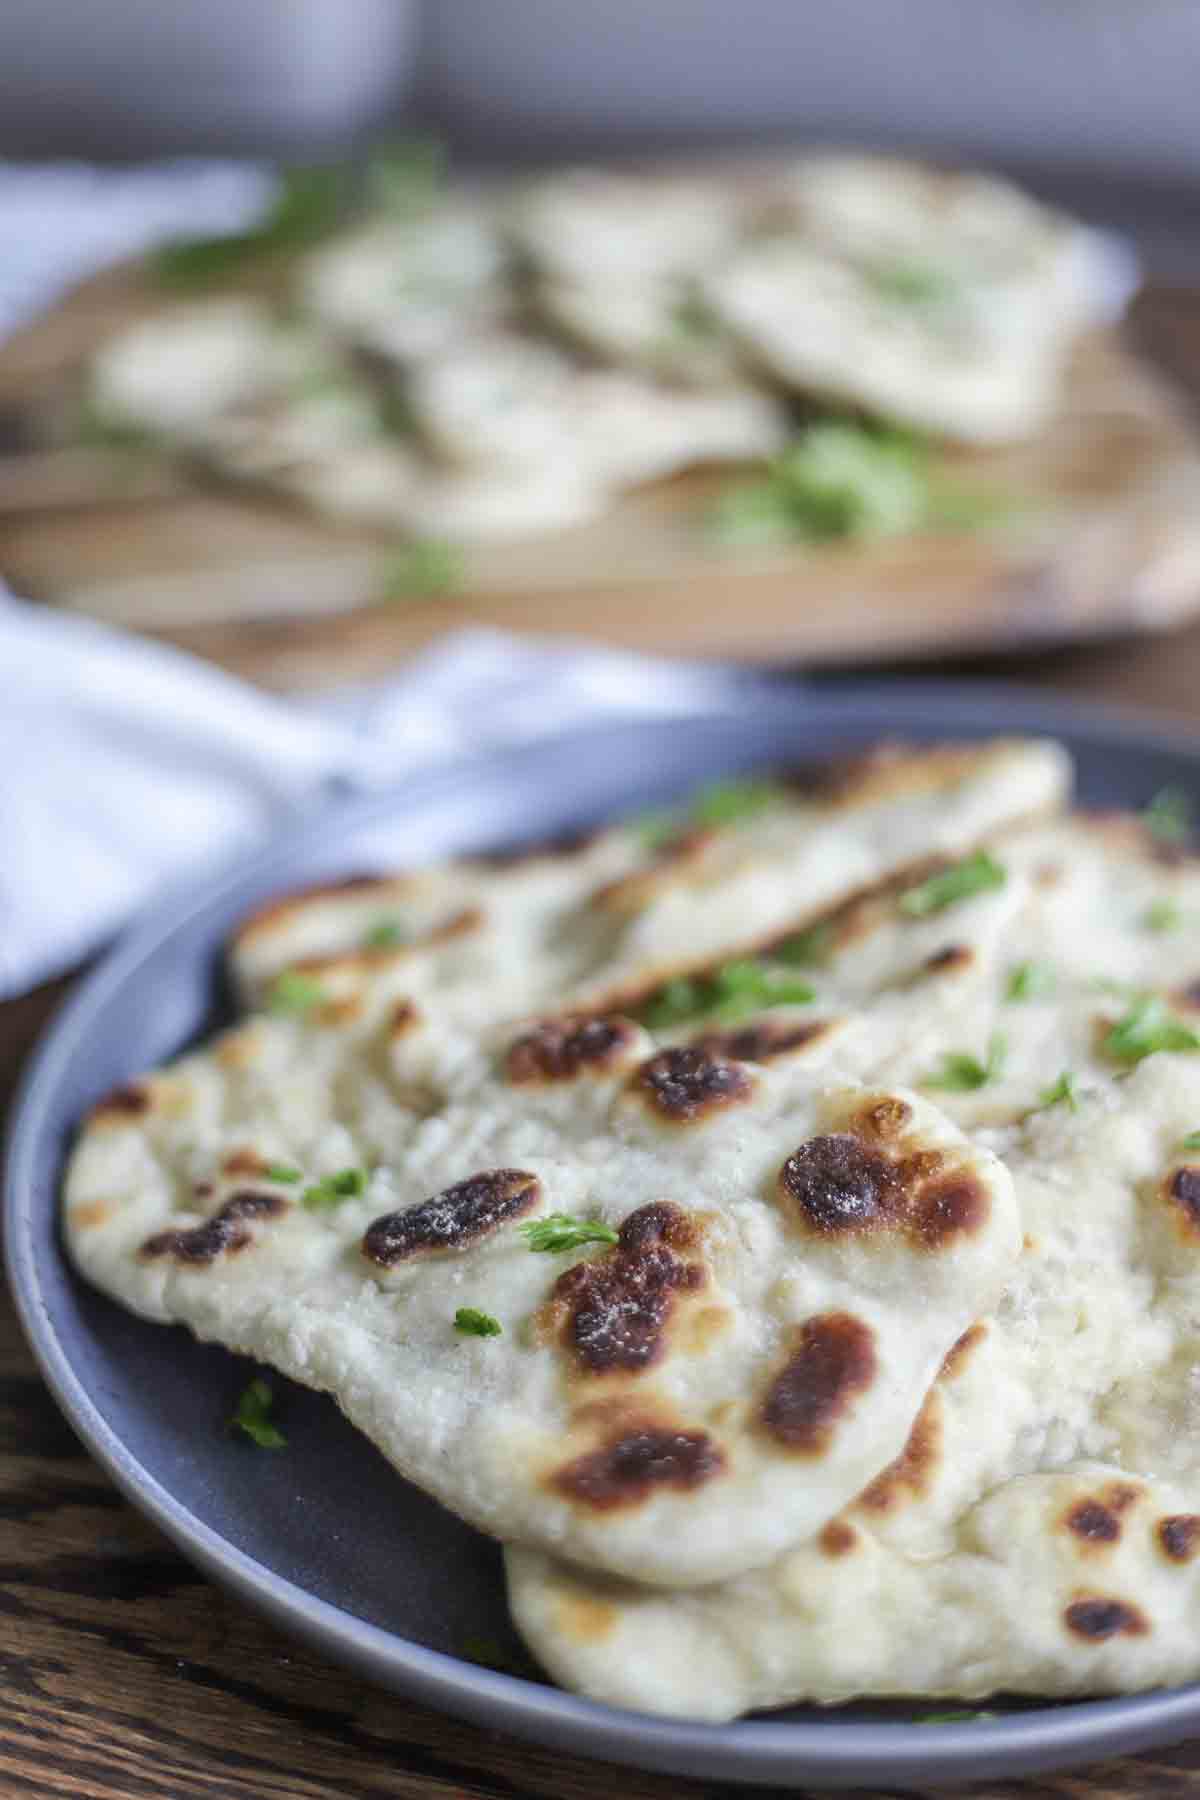 Easy Sourdough Flatbread Recipe (With Active Starter Or Discard – No Yeast)